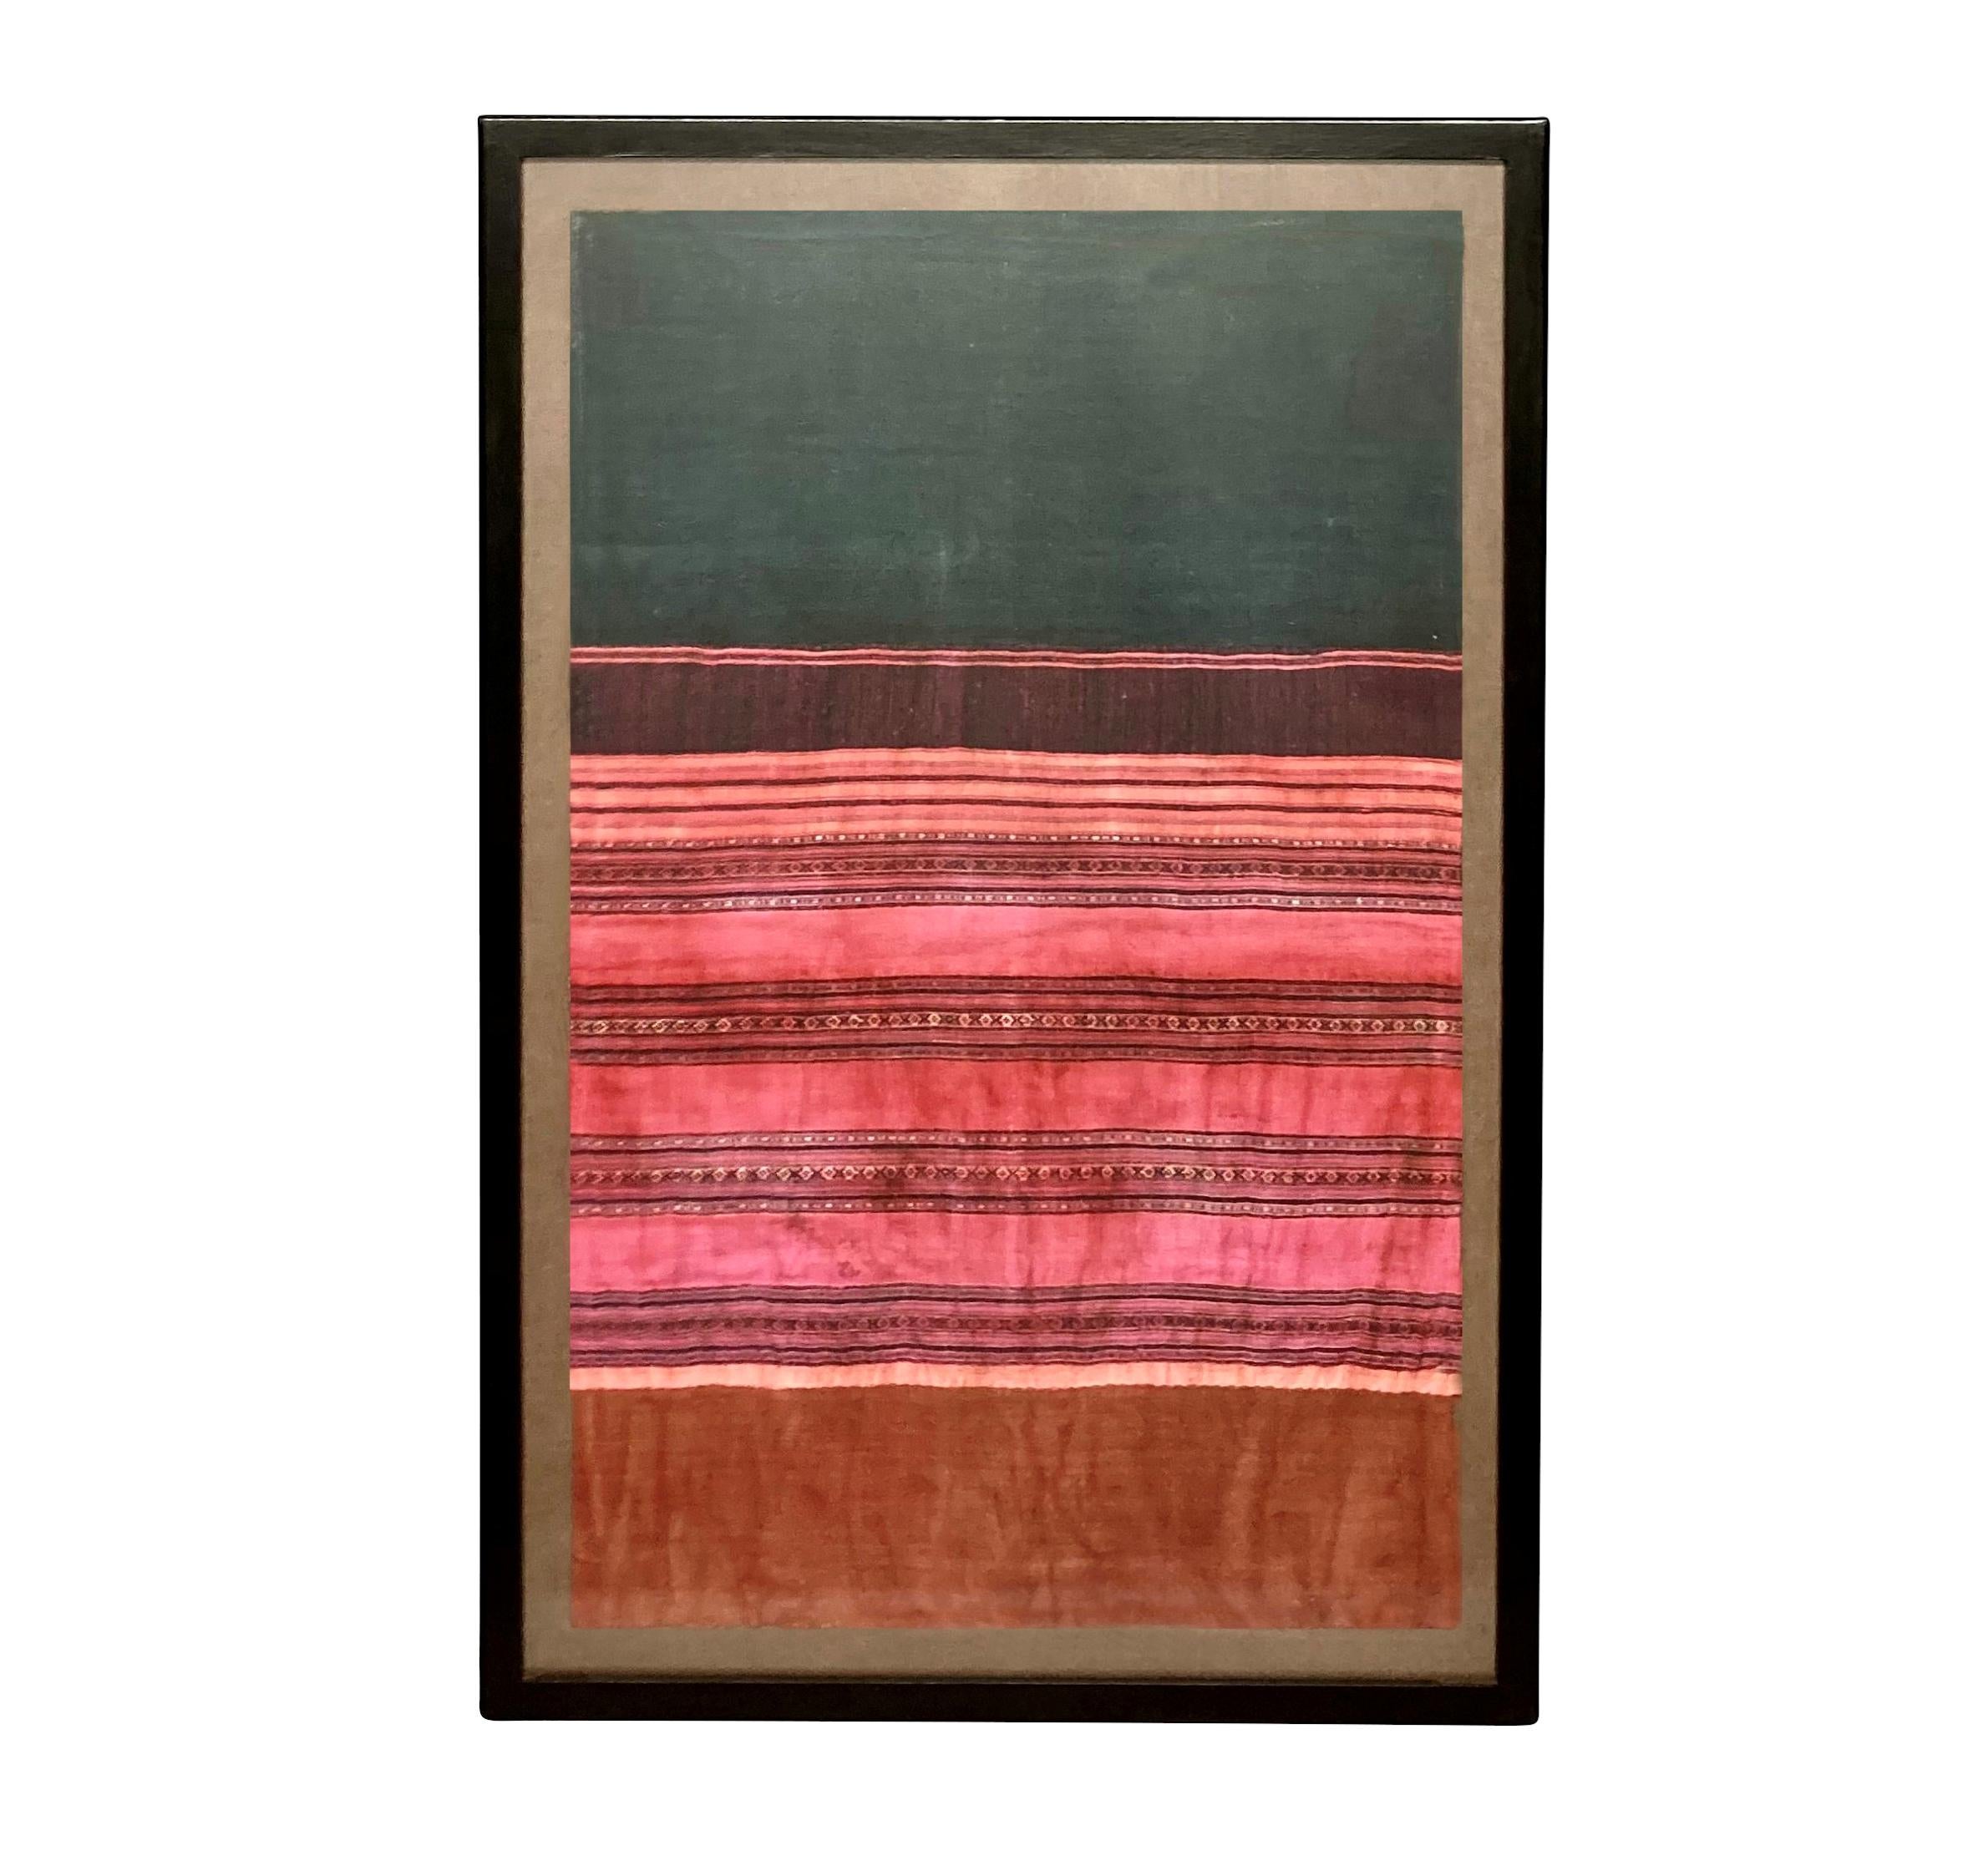 A set of three large Northern Thailand (Lanna) traditional hand-woven textiles in vibrant colours. Framed behind glass, against a raw linen background.
Measure: 119cm high & 111cm high x 74cm wide